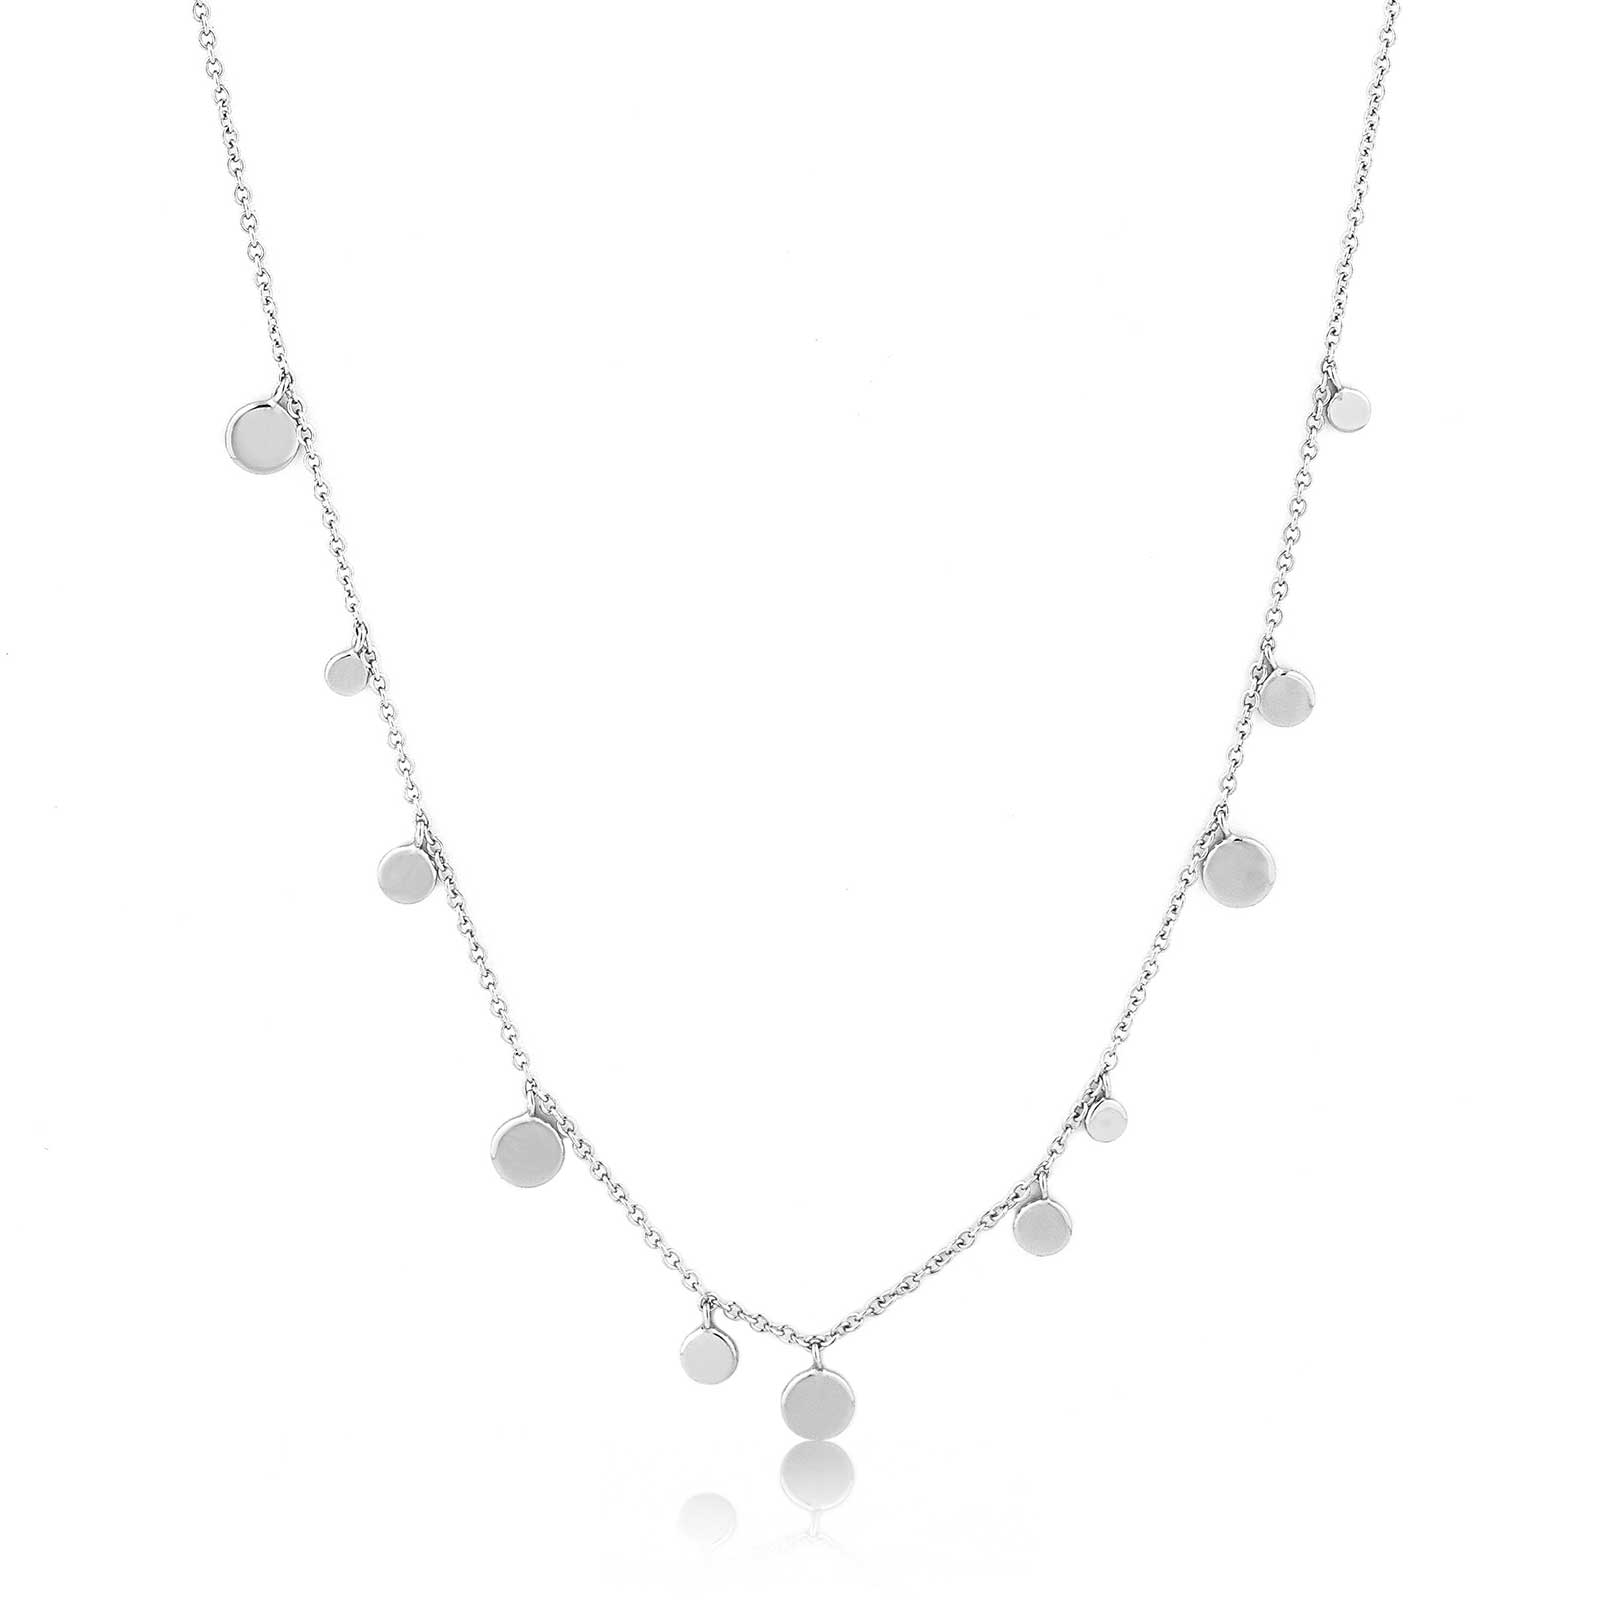 Ania Haie Geometry Mixed Discs Necklace, Sterling Silver: Precious ...